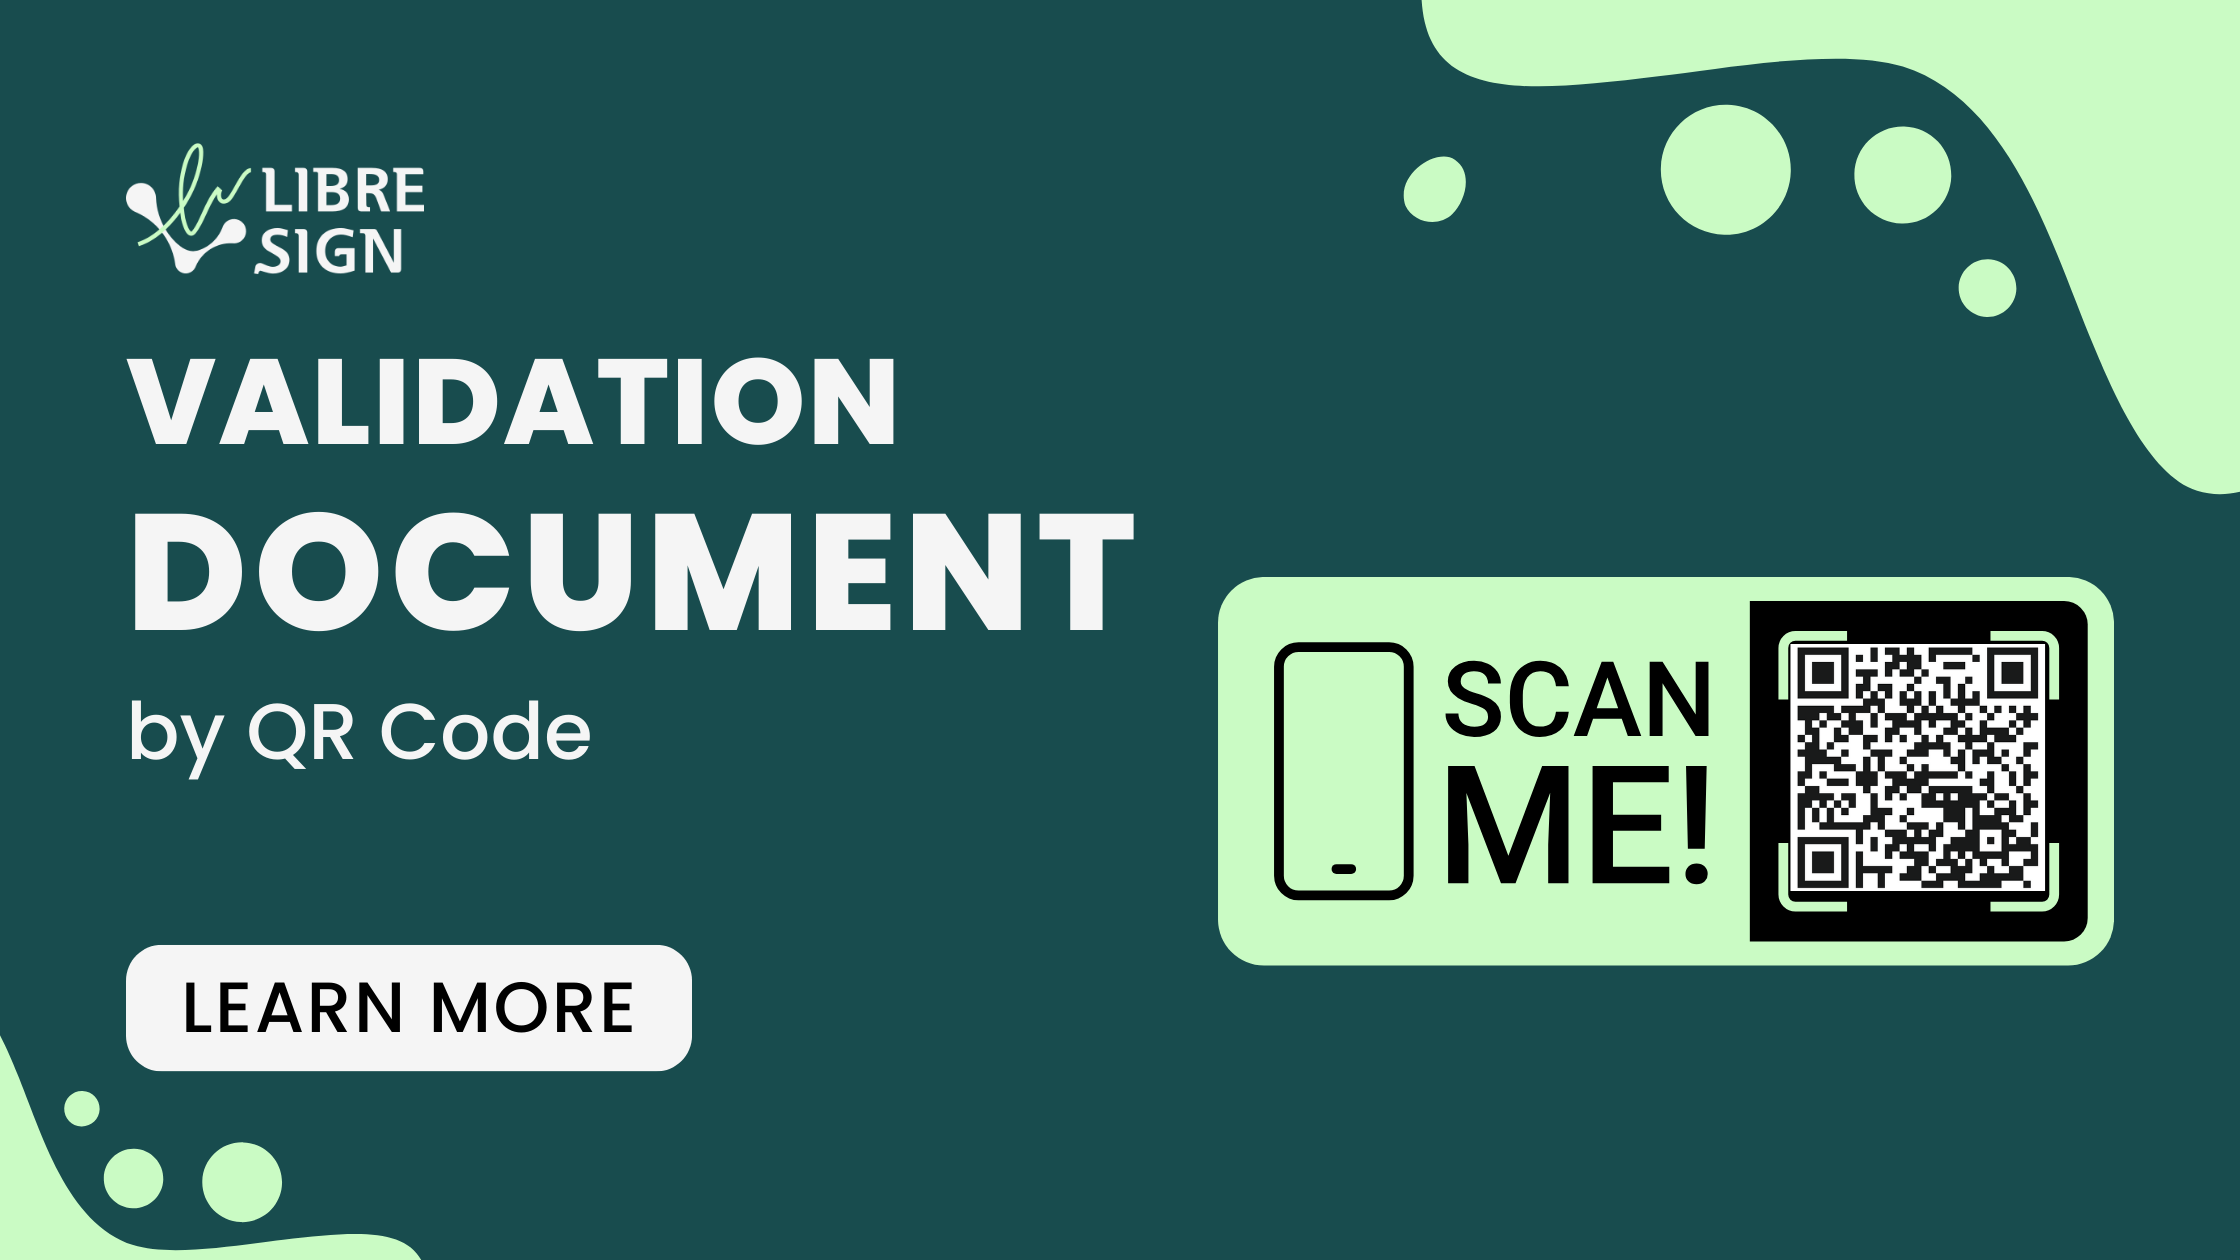 Document validation by QR Code